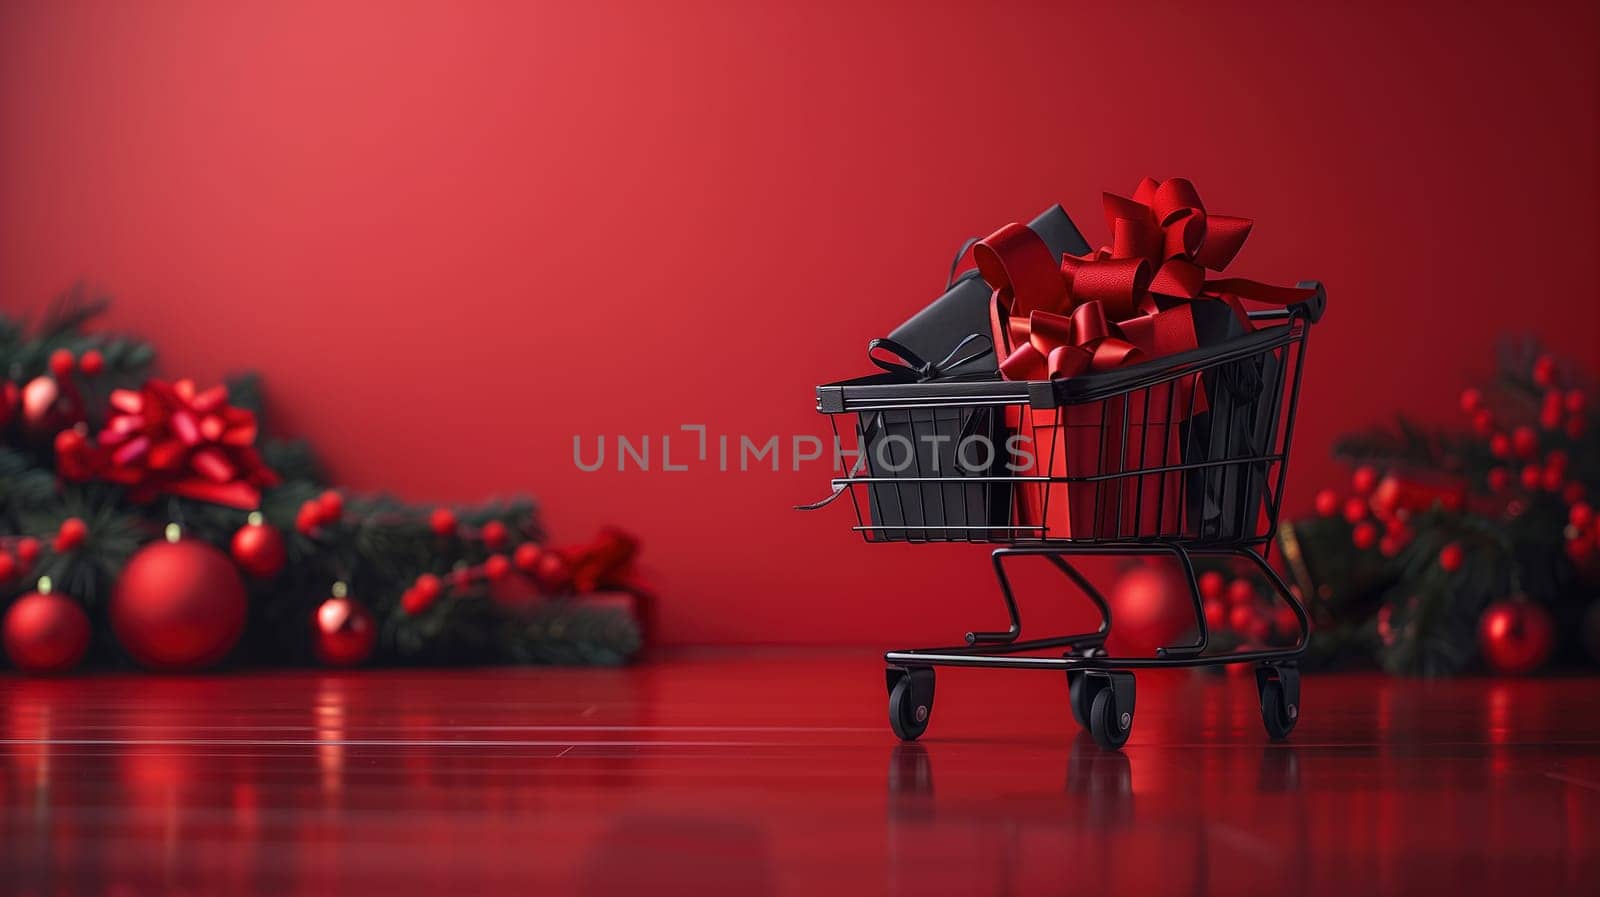 A shopping cart filled with a wrapped Christmas present, symbolizing holiday shopping and the festive season. The cart is set against a store background, hinting at Black Friday sale promotions.